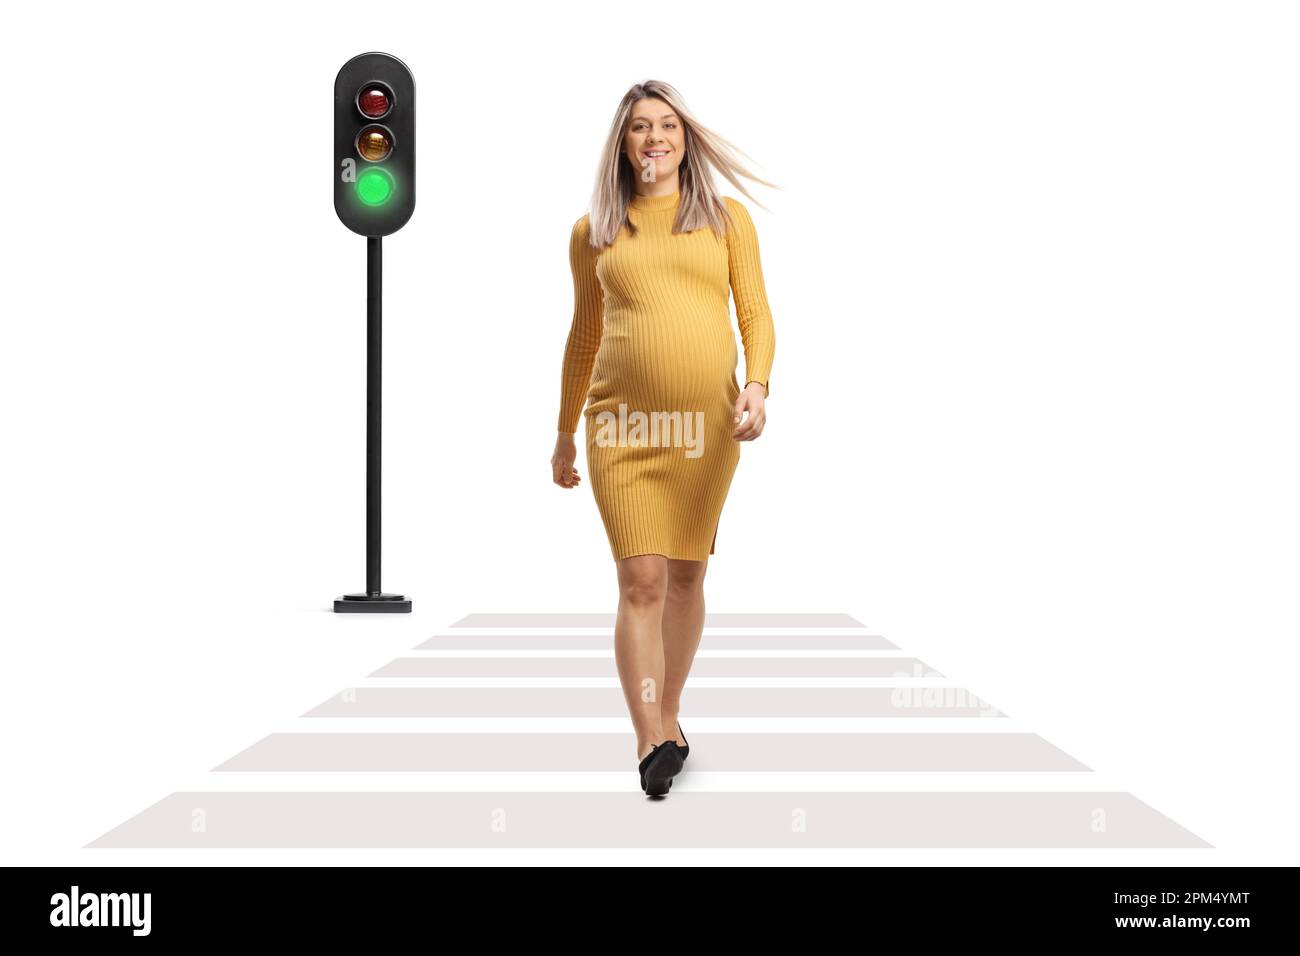 Full length portrait of a pregnant woman in a yellow dress crossing a street at a pedestrian crossing isolated on white background Stock Photo